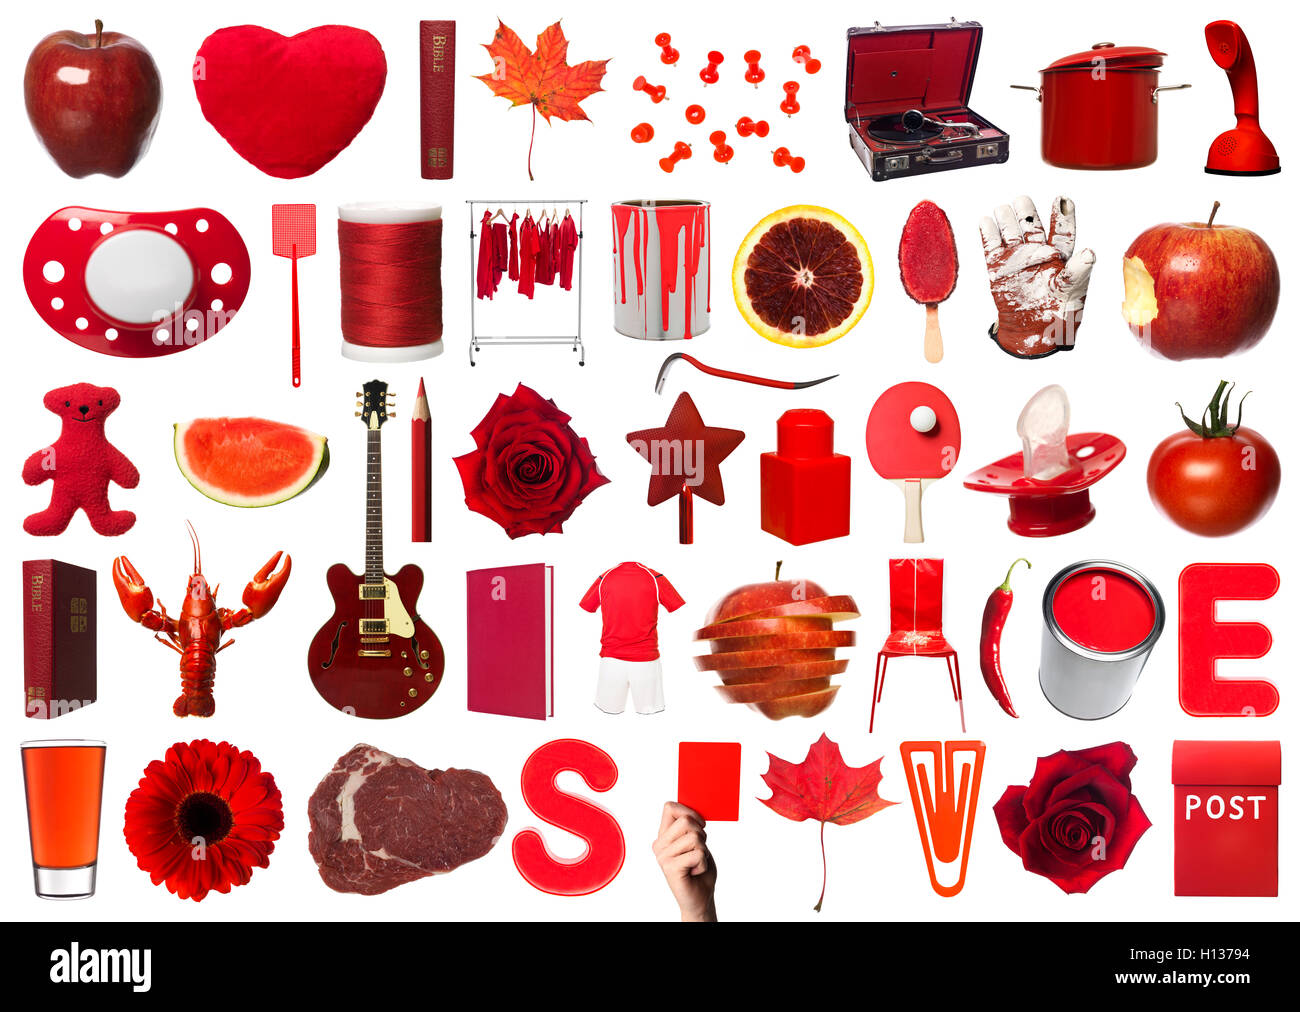 Red Objects Collage Stock Photo